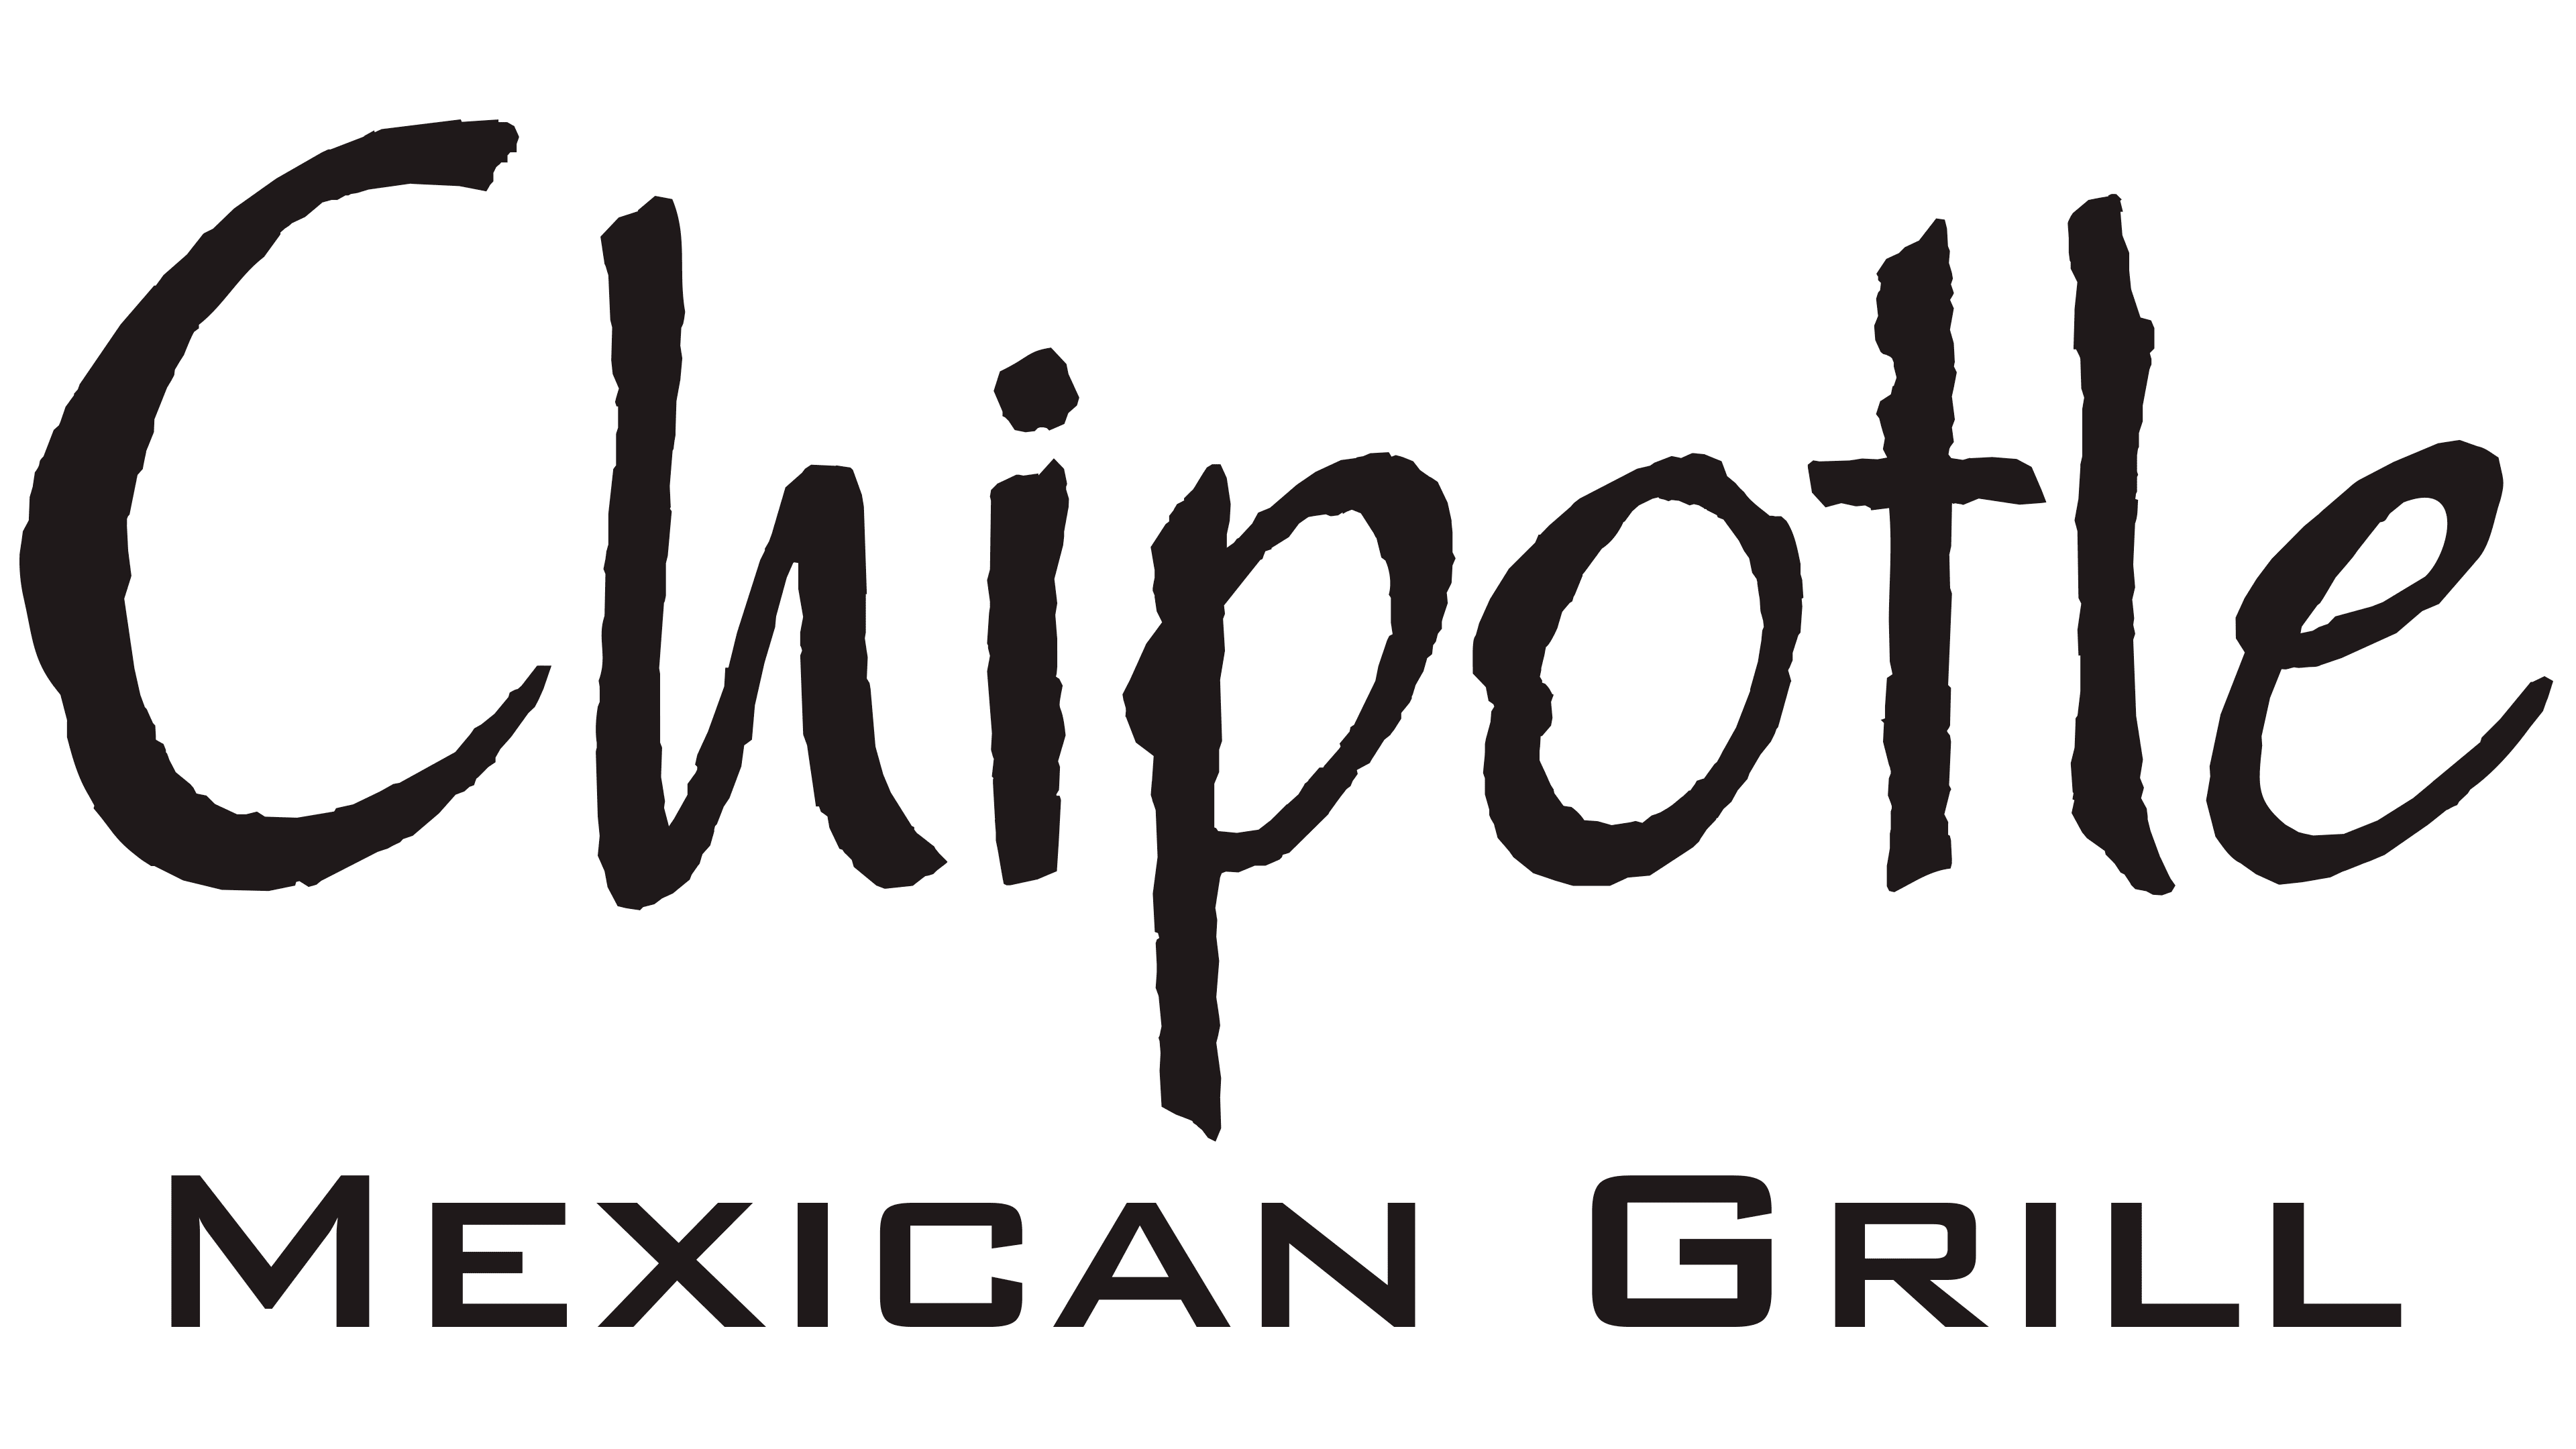 Chipotle Logo, PNG, Symbol, History, Meaning